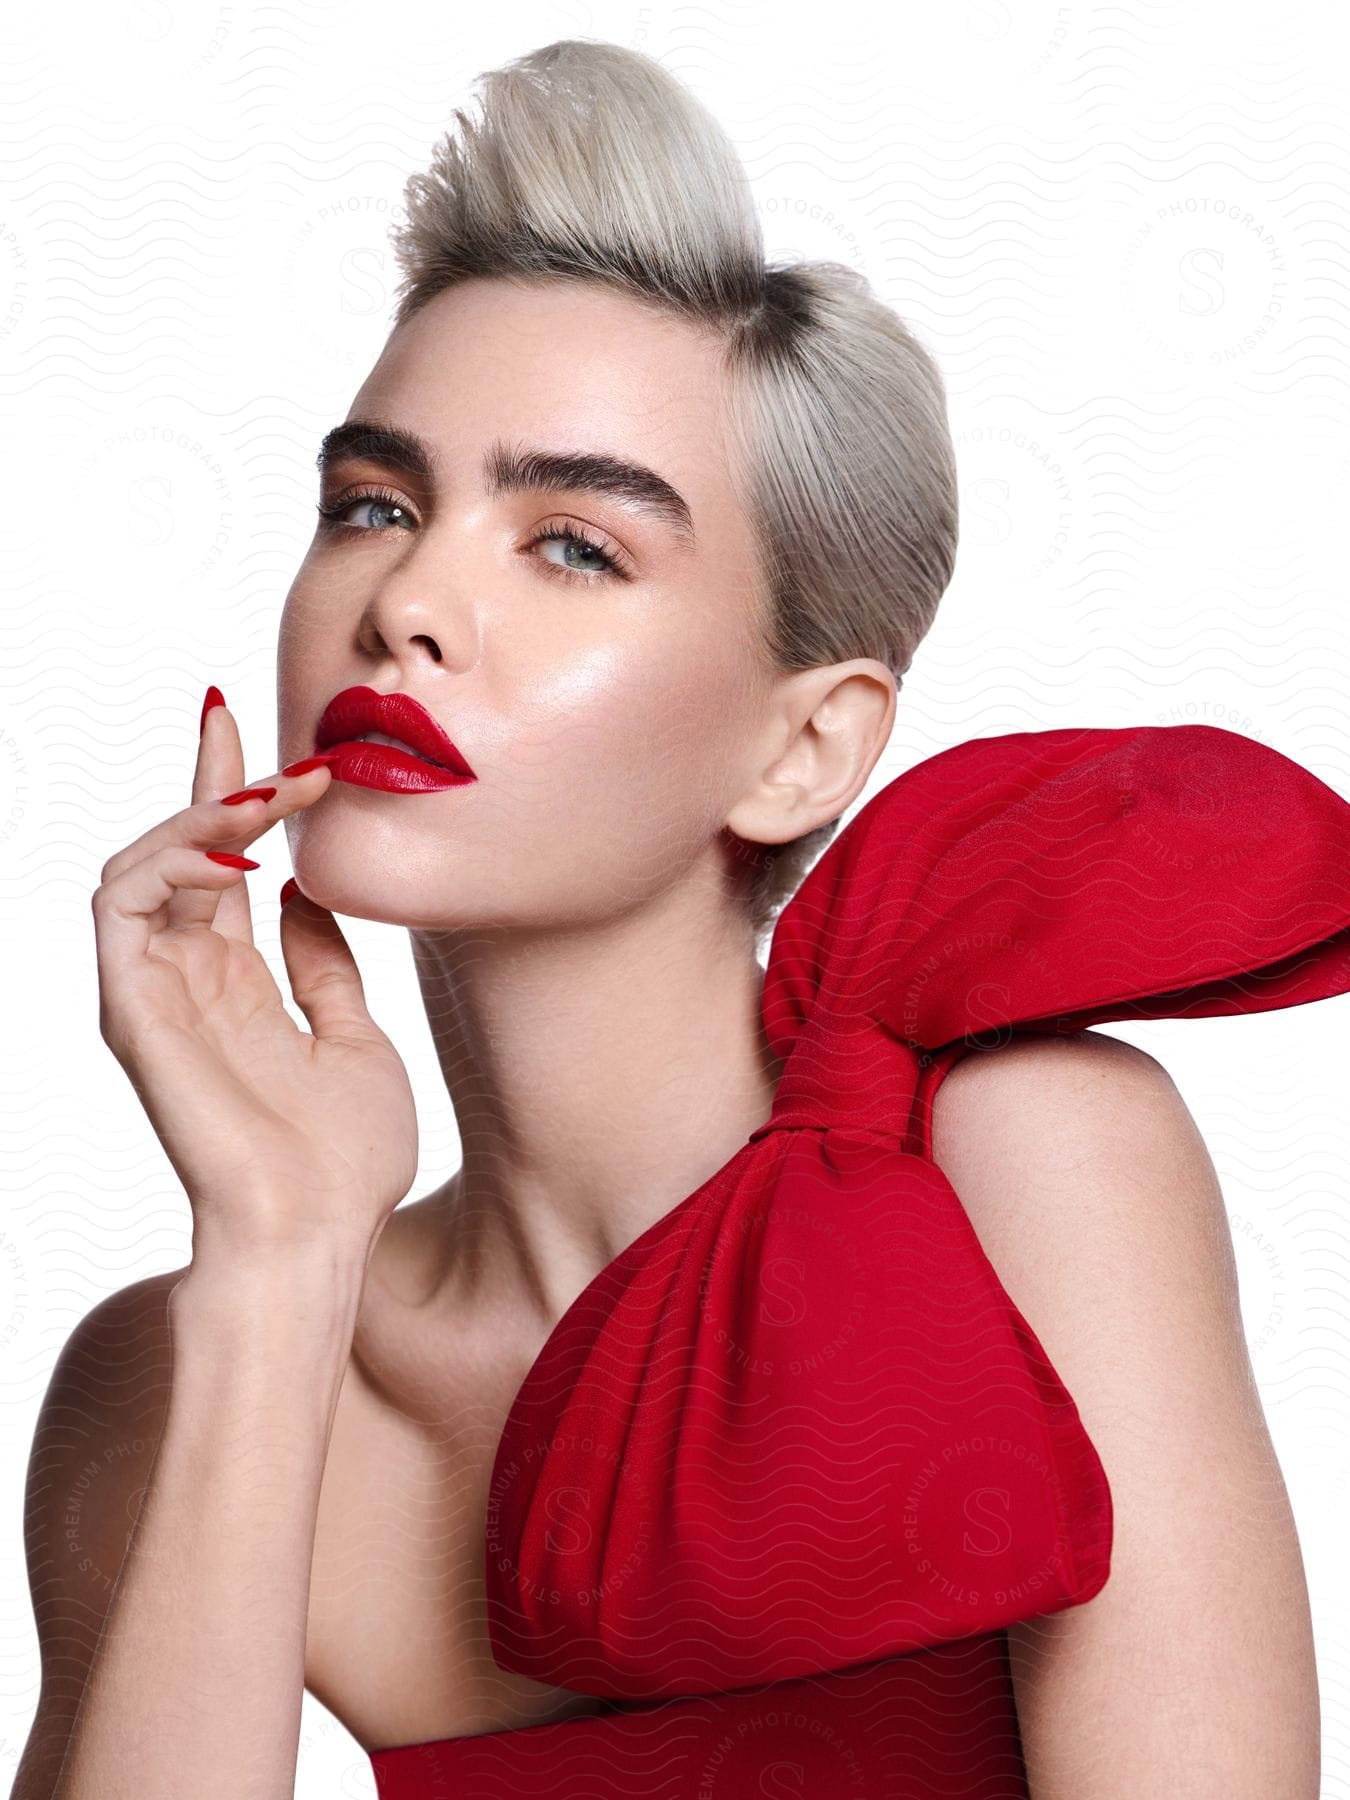 Woman wearing lipstick and red dress with red bow on shoulder touches her lips with hand